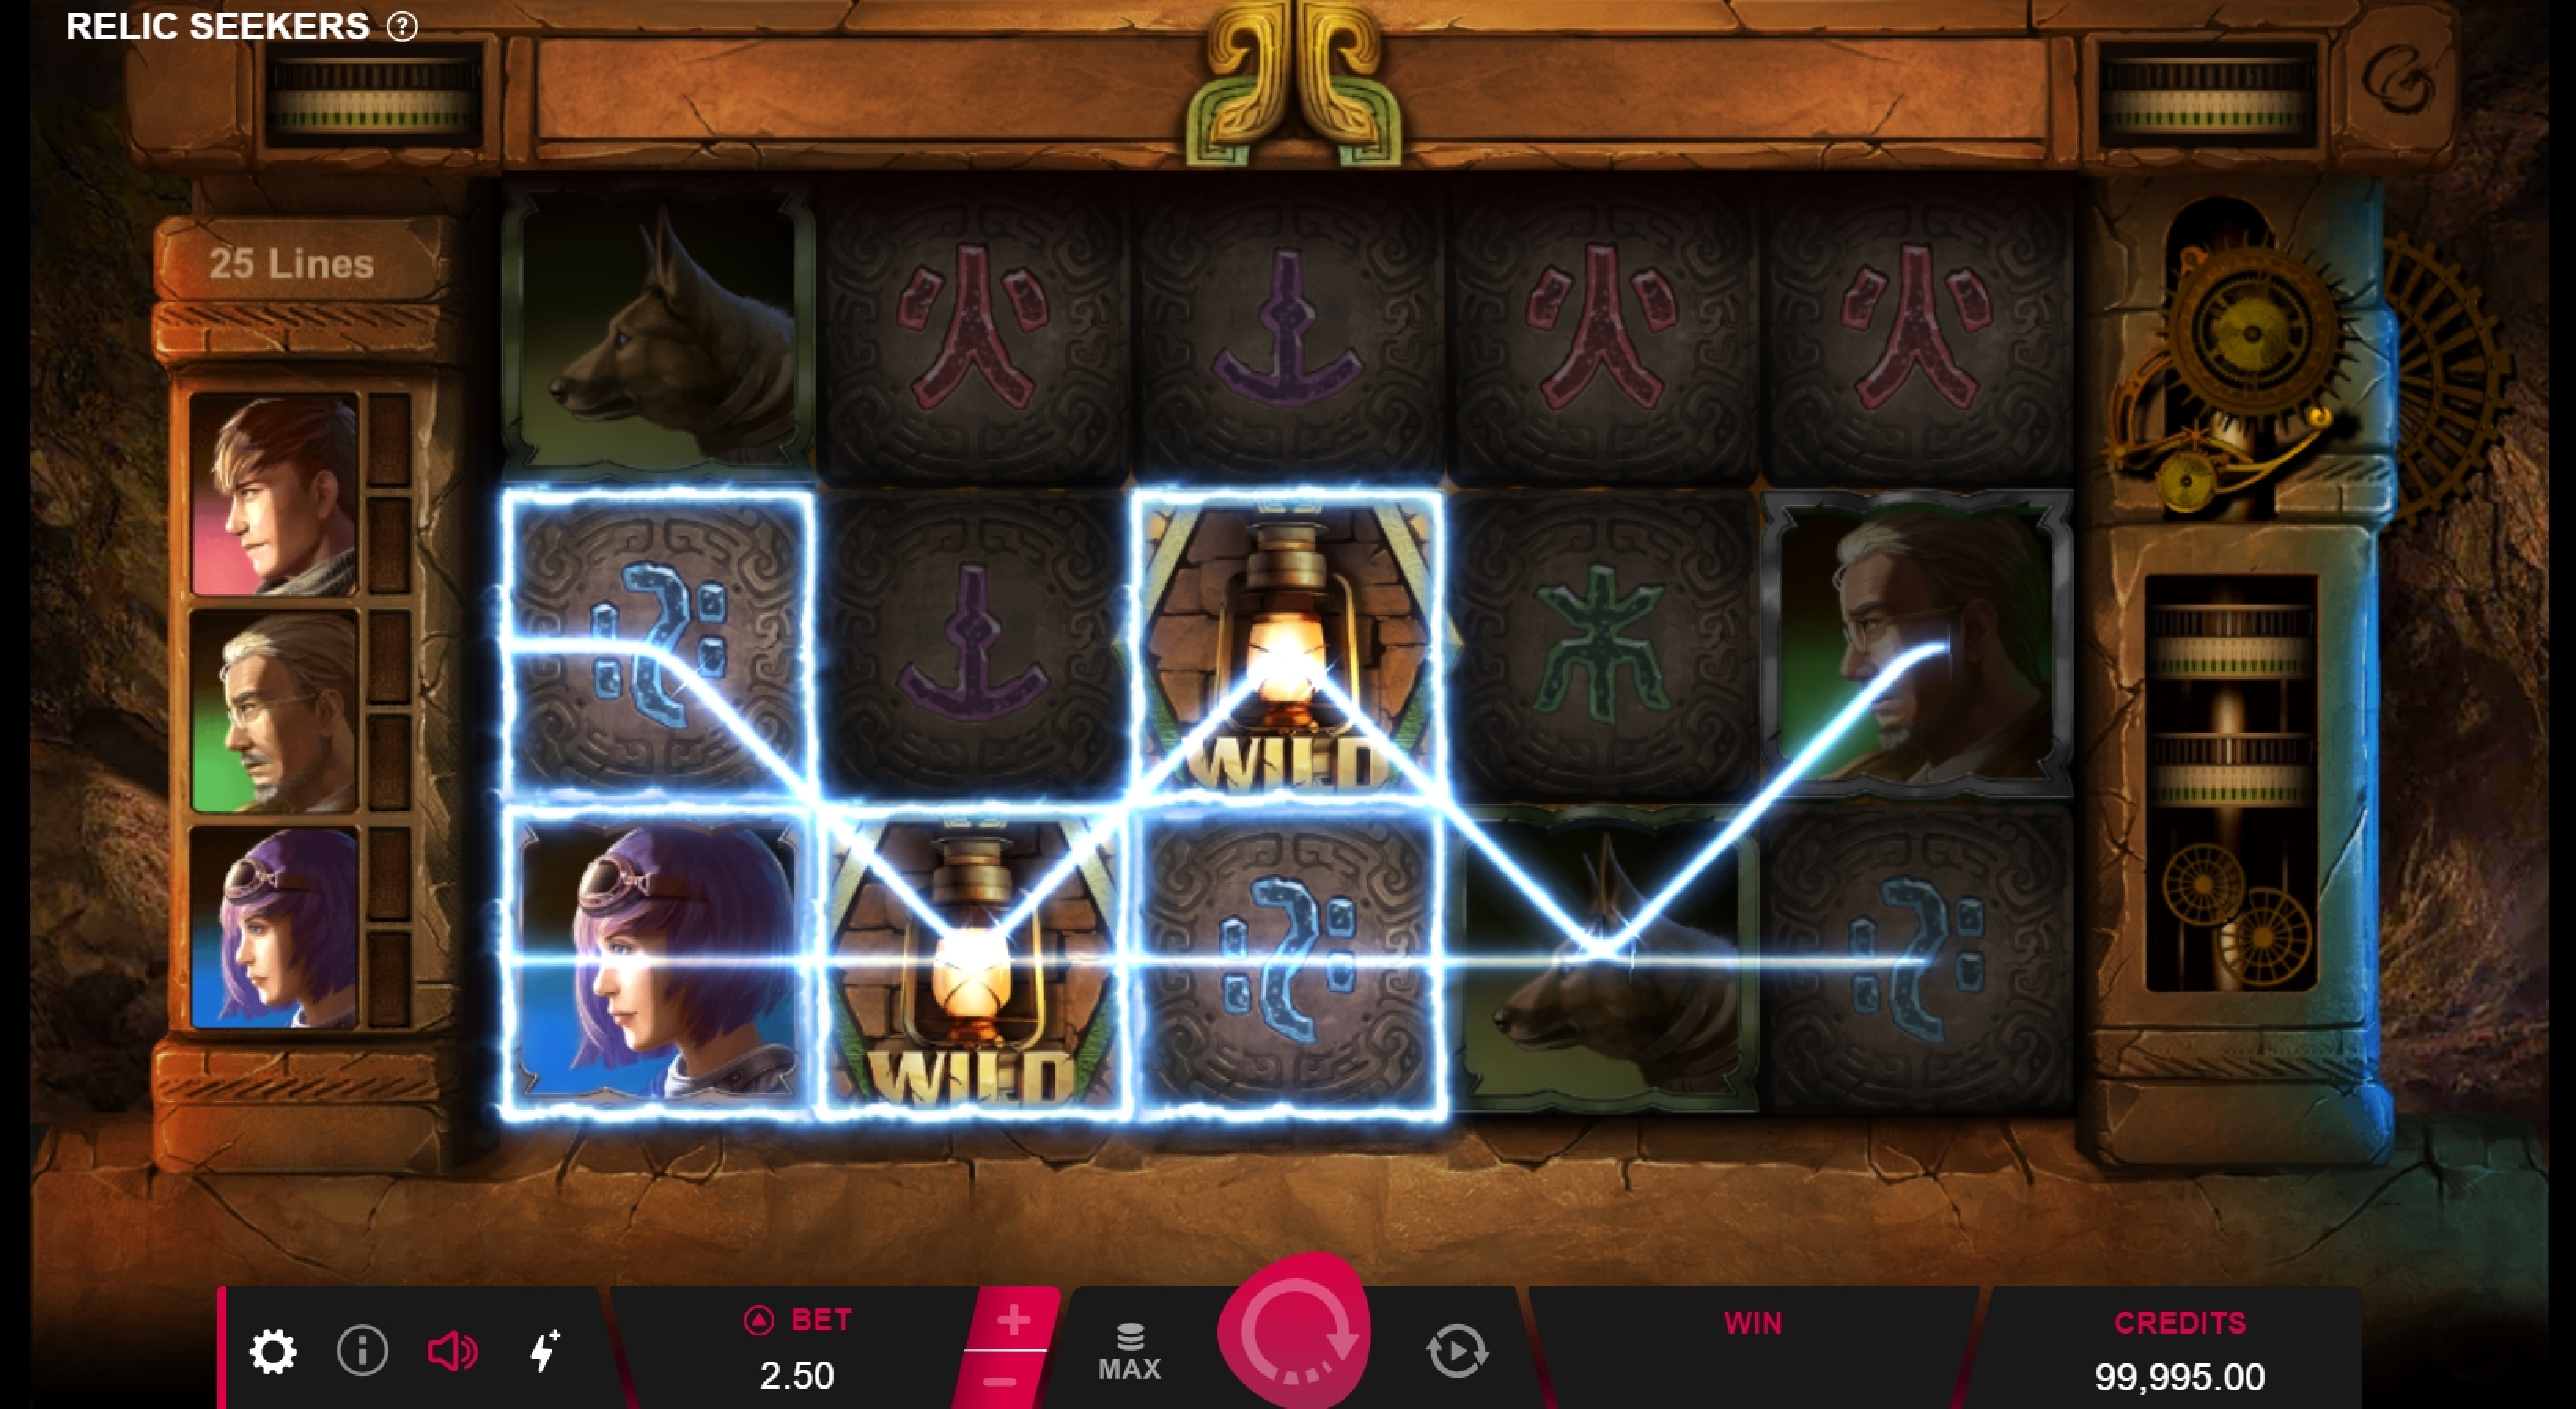 Win Money in Relic Seekers Free Slot Game by Pulse 8 Studios